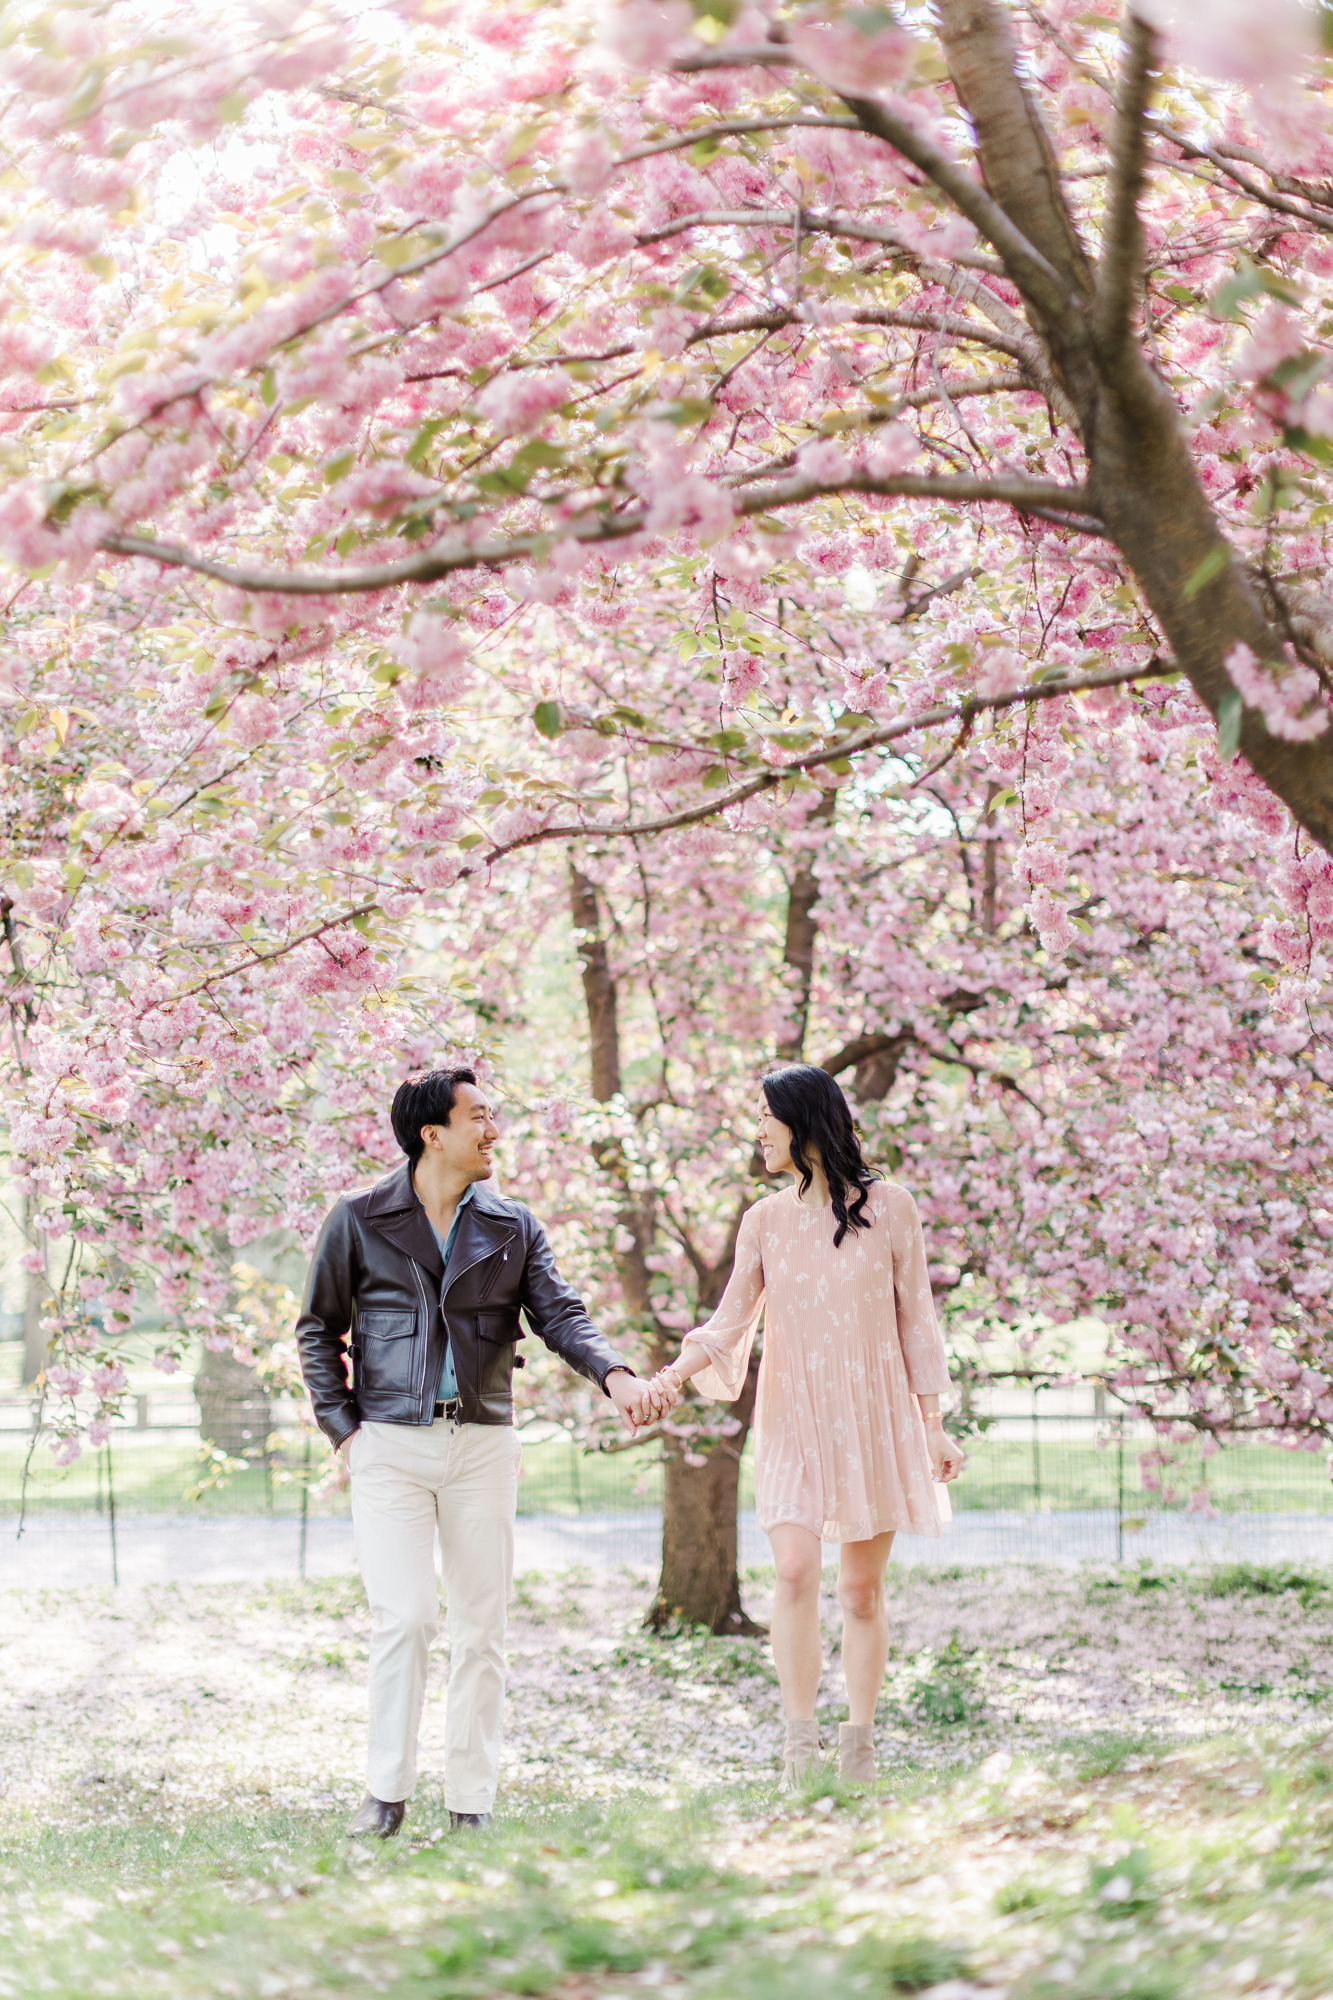 Whimsical Engagement Photos With Cherry Blossoms in NYC